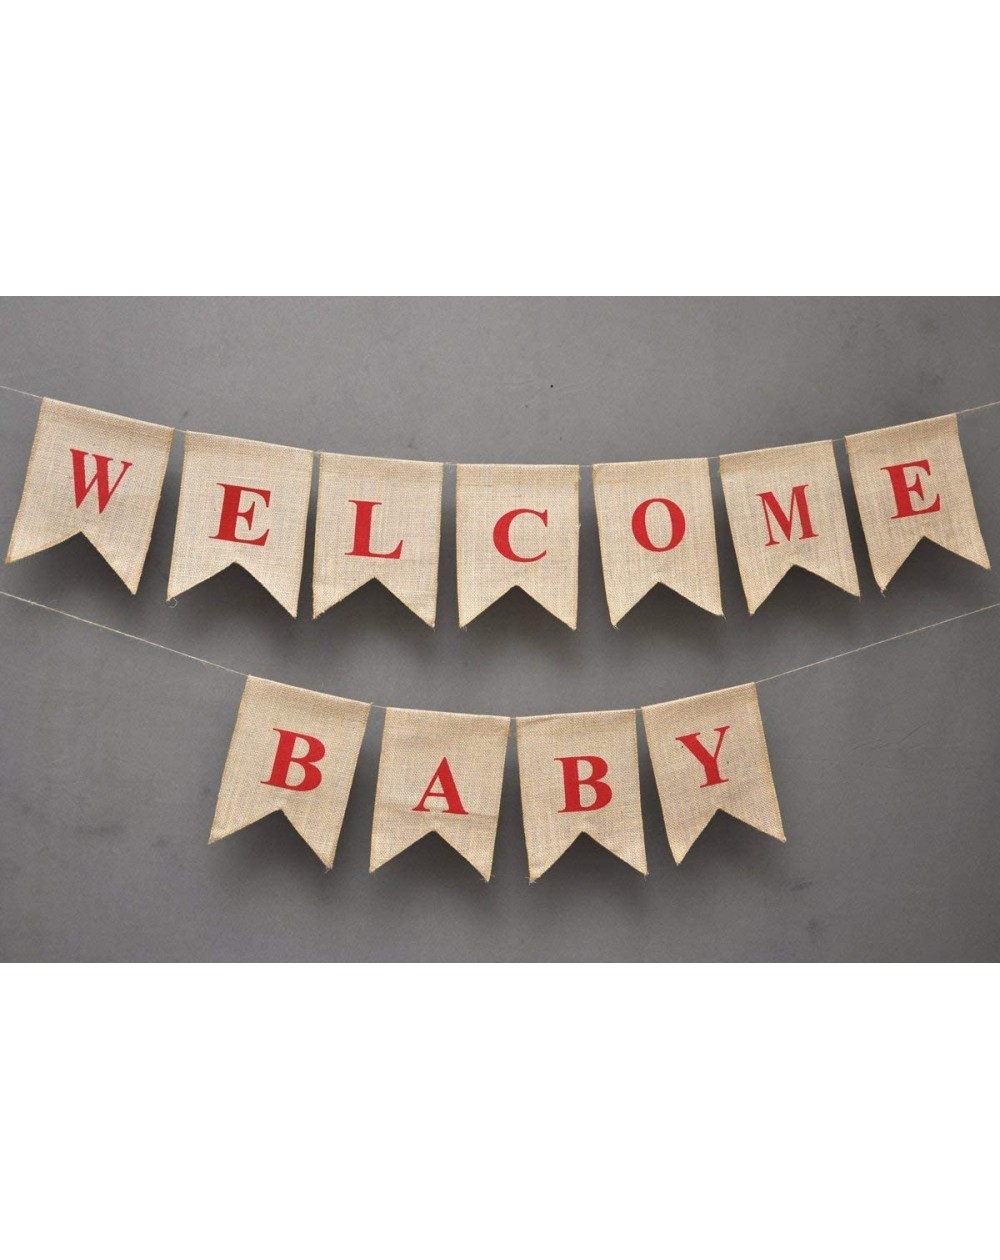 Banners & Garlands WELCOME BABY Burlap Banner - Elegant Baby Shower Flag Banner - Pink/Blue feet Welcome - Ornate Welcome Bab...